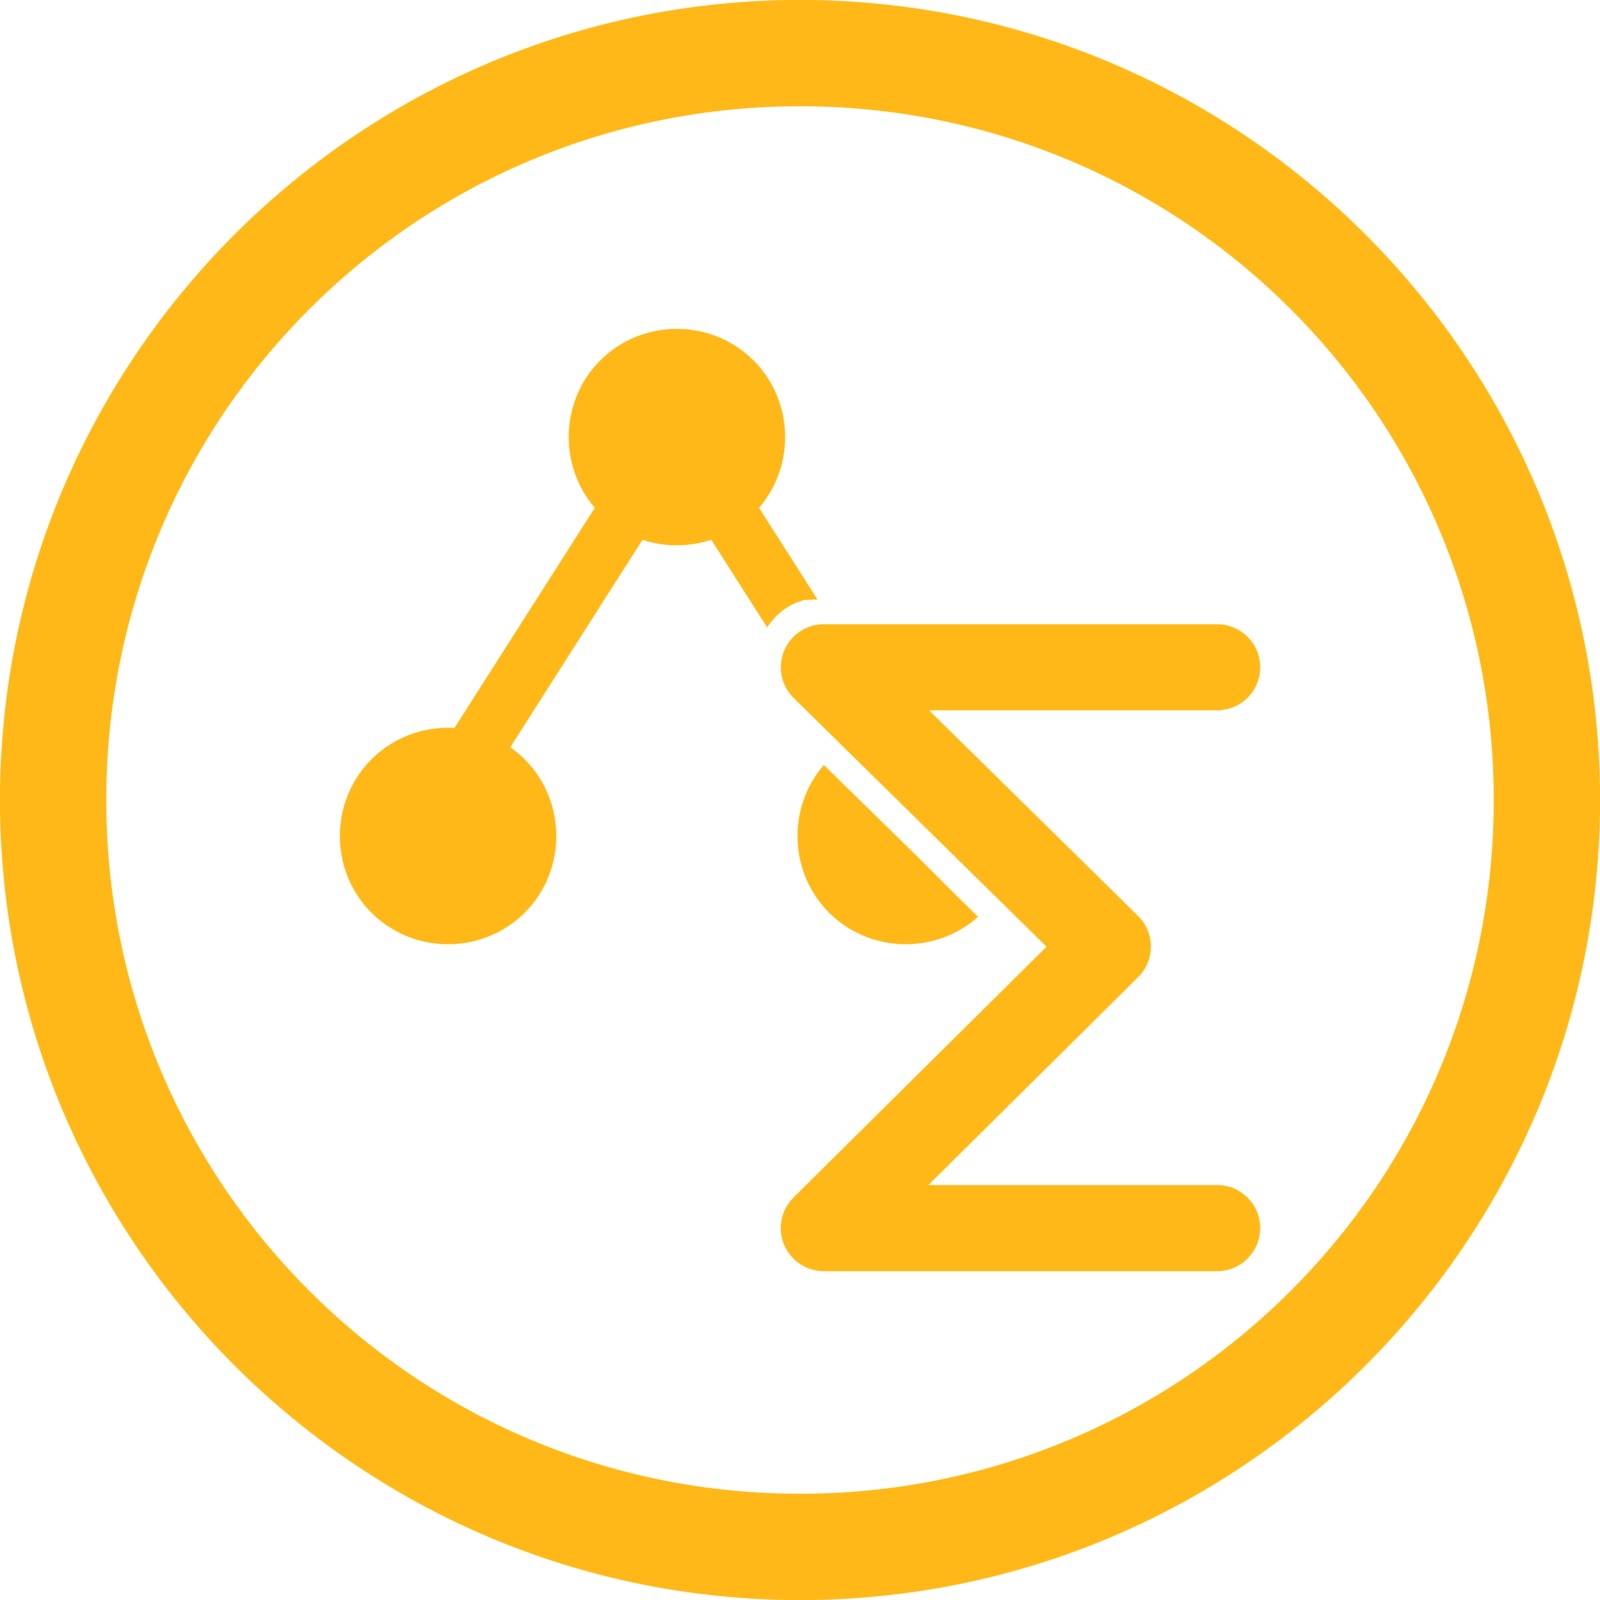 Analysis vector icon. This flat rounded symbol uses yellow color and isolated on a white background.